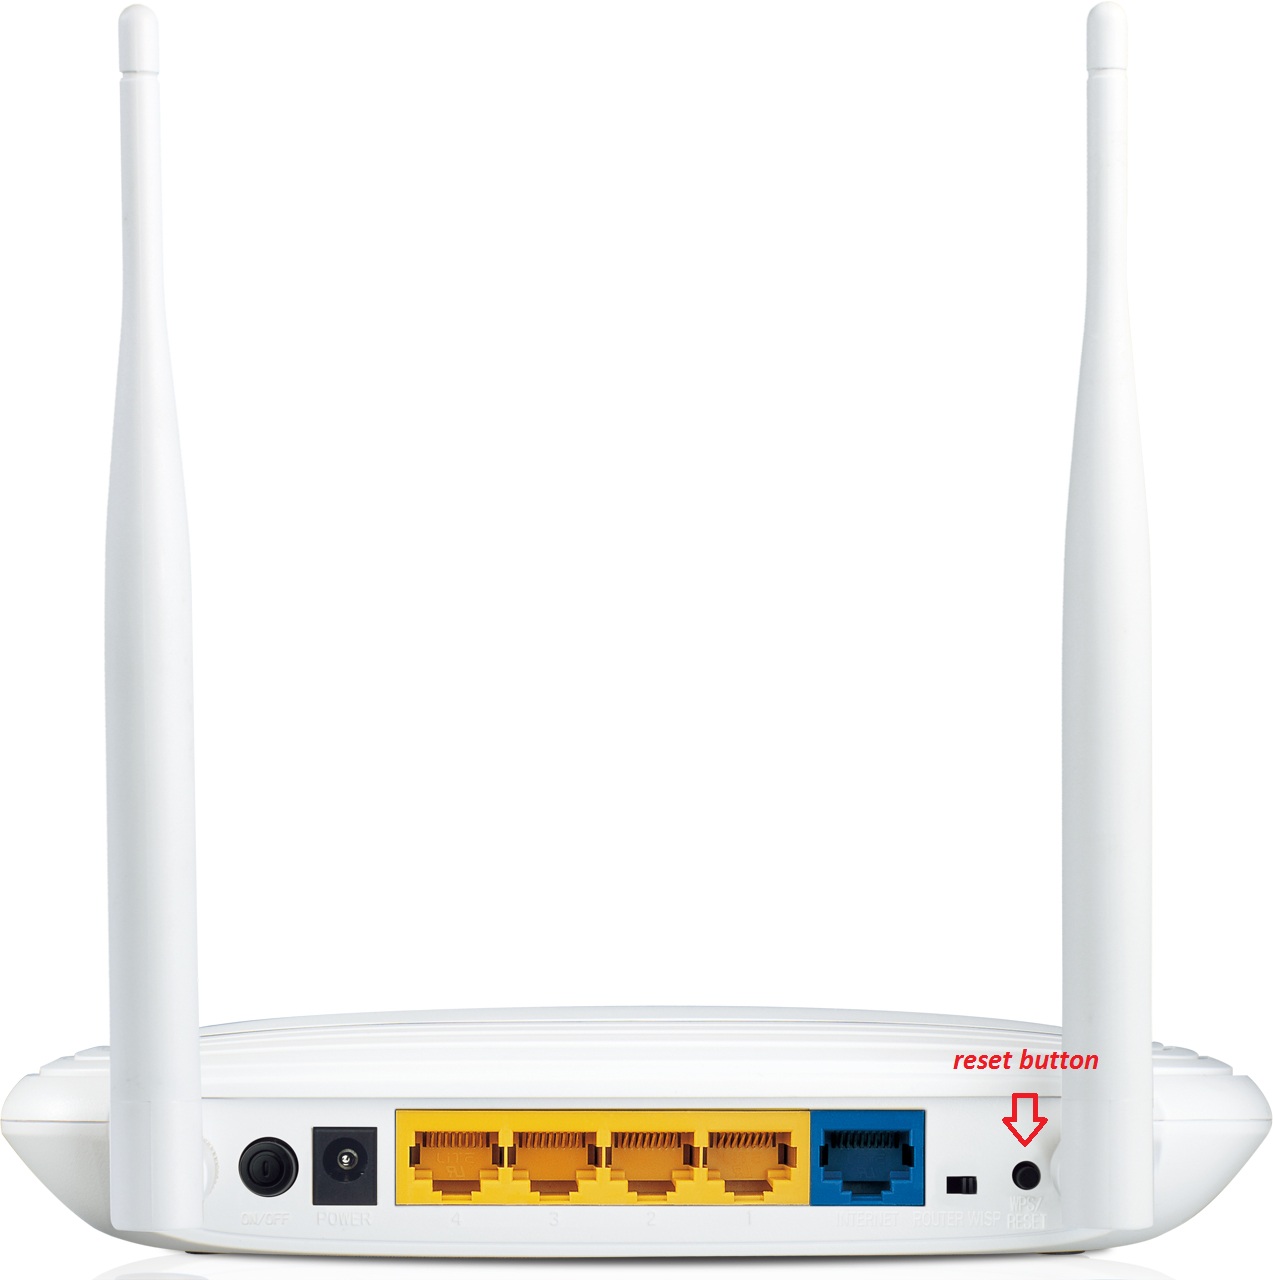 Hard reset TP-LINK TL-WR30ND - How to Hard Reset Your Router